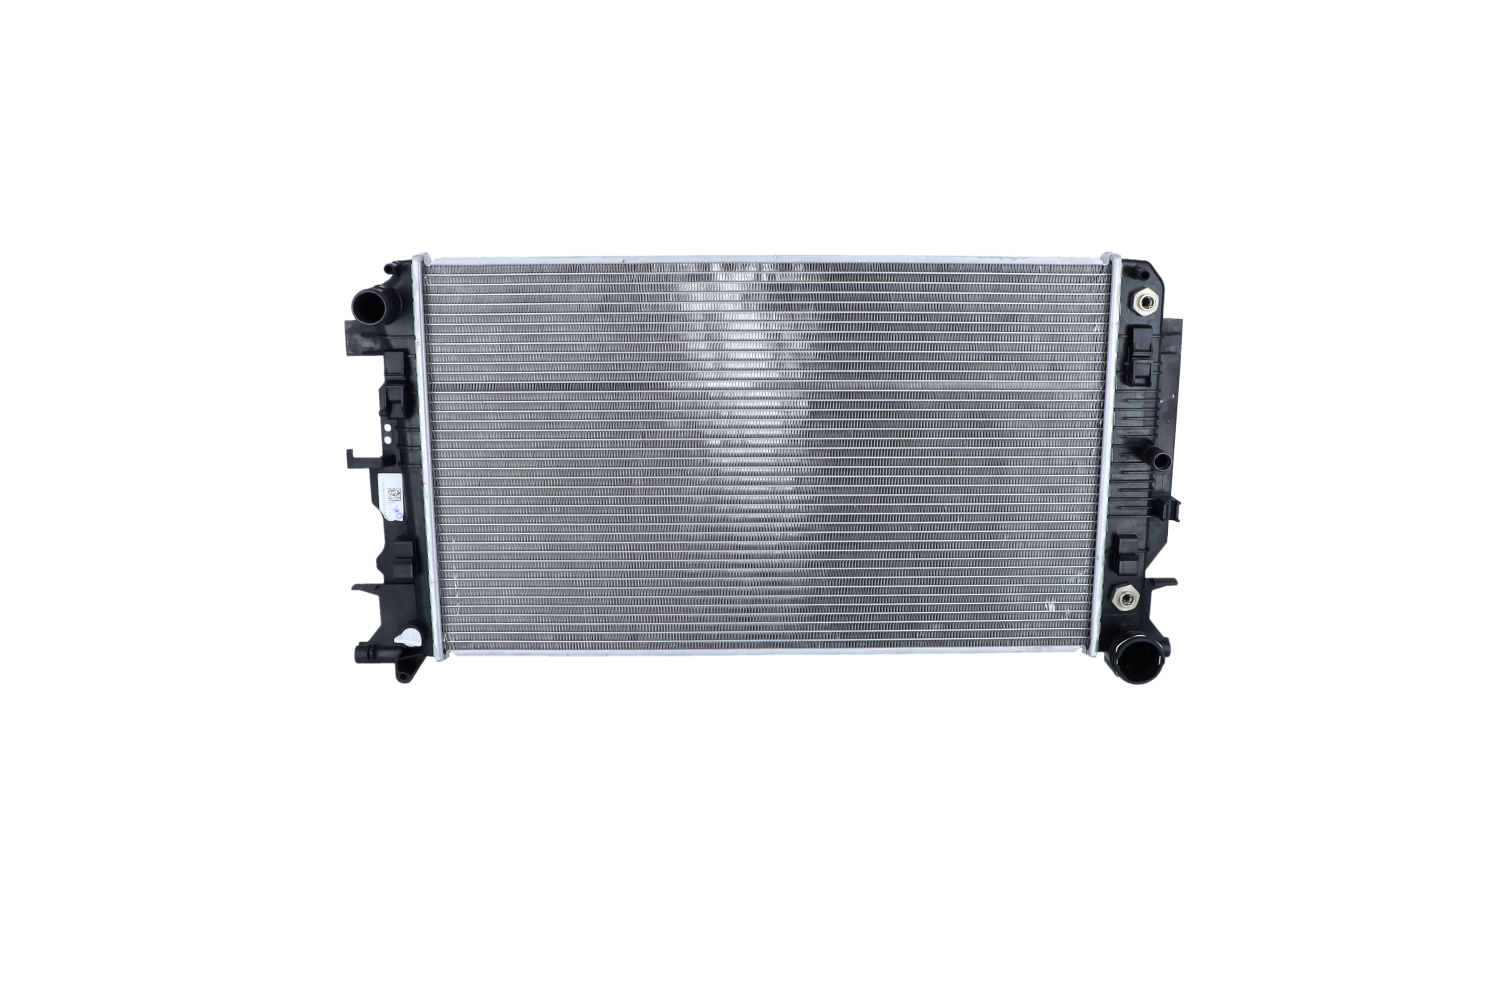 NRF 53833 Engine radiator Aluminium, 680 x 408 x 28 mm, with mounting parts, Brazed cooling fins